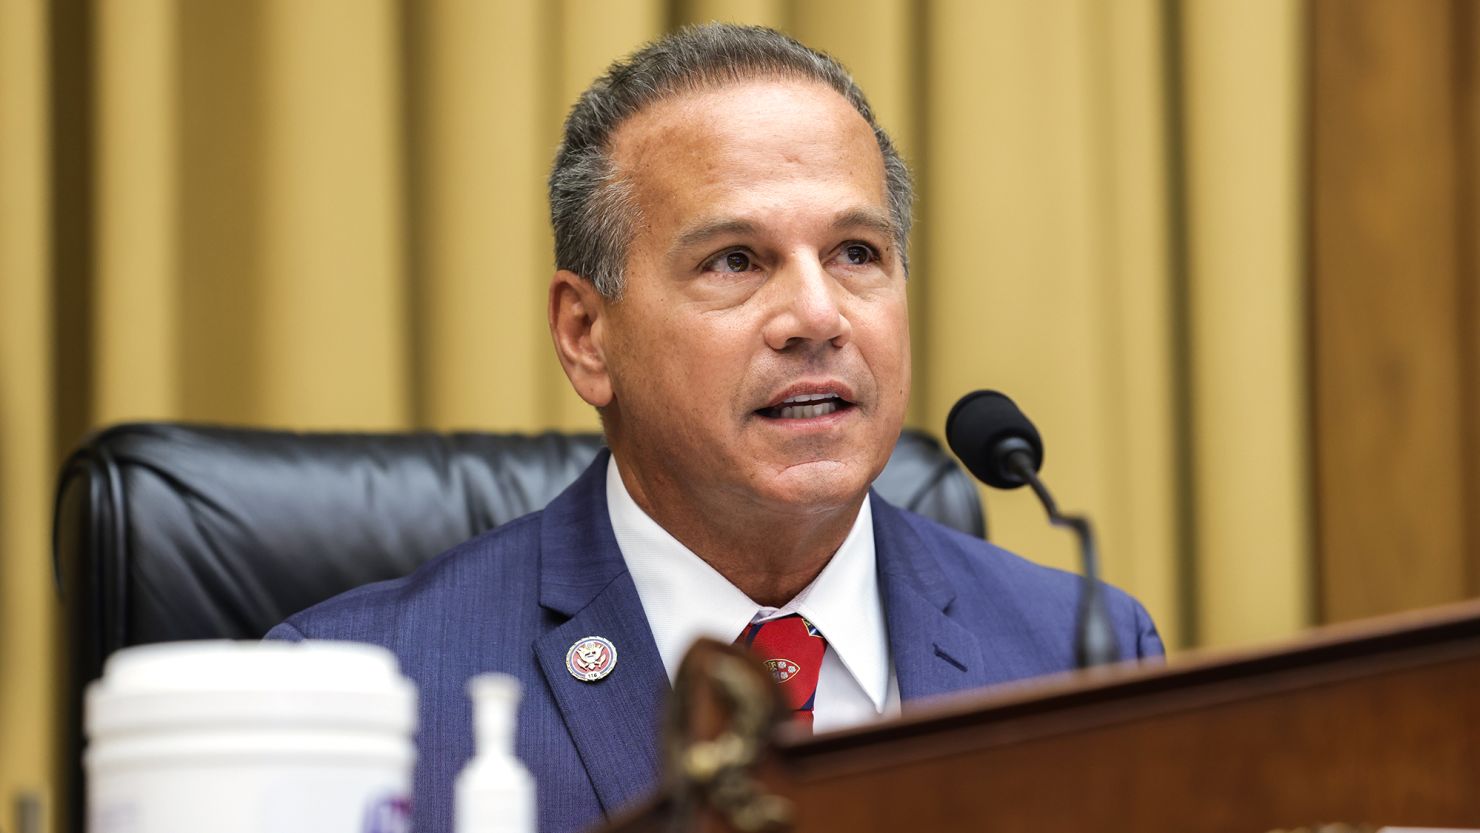 In this July 2020 photo, Rep. David Cicilline speaks during the House Judiciary Subcommittee on Antitrust, Commercial and Administrative Law hearing on Online Platforms and Market Power in the Rayburn House office Building on Capitol Hill in Washington, DC.